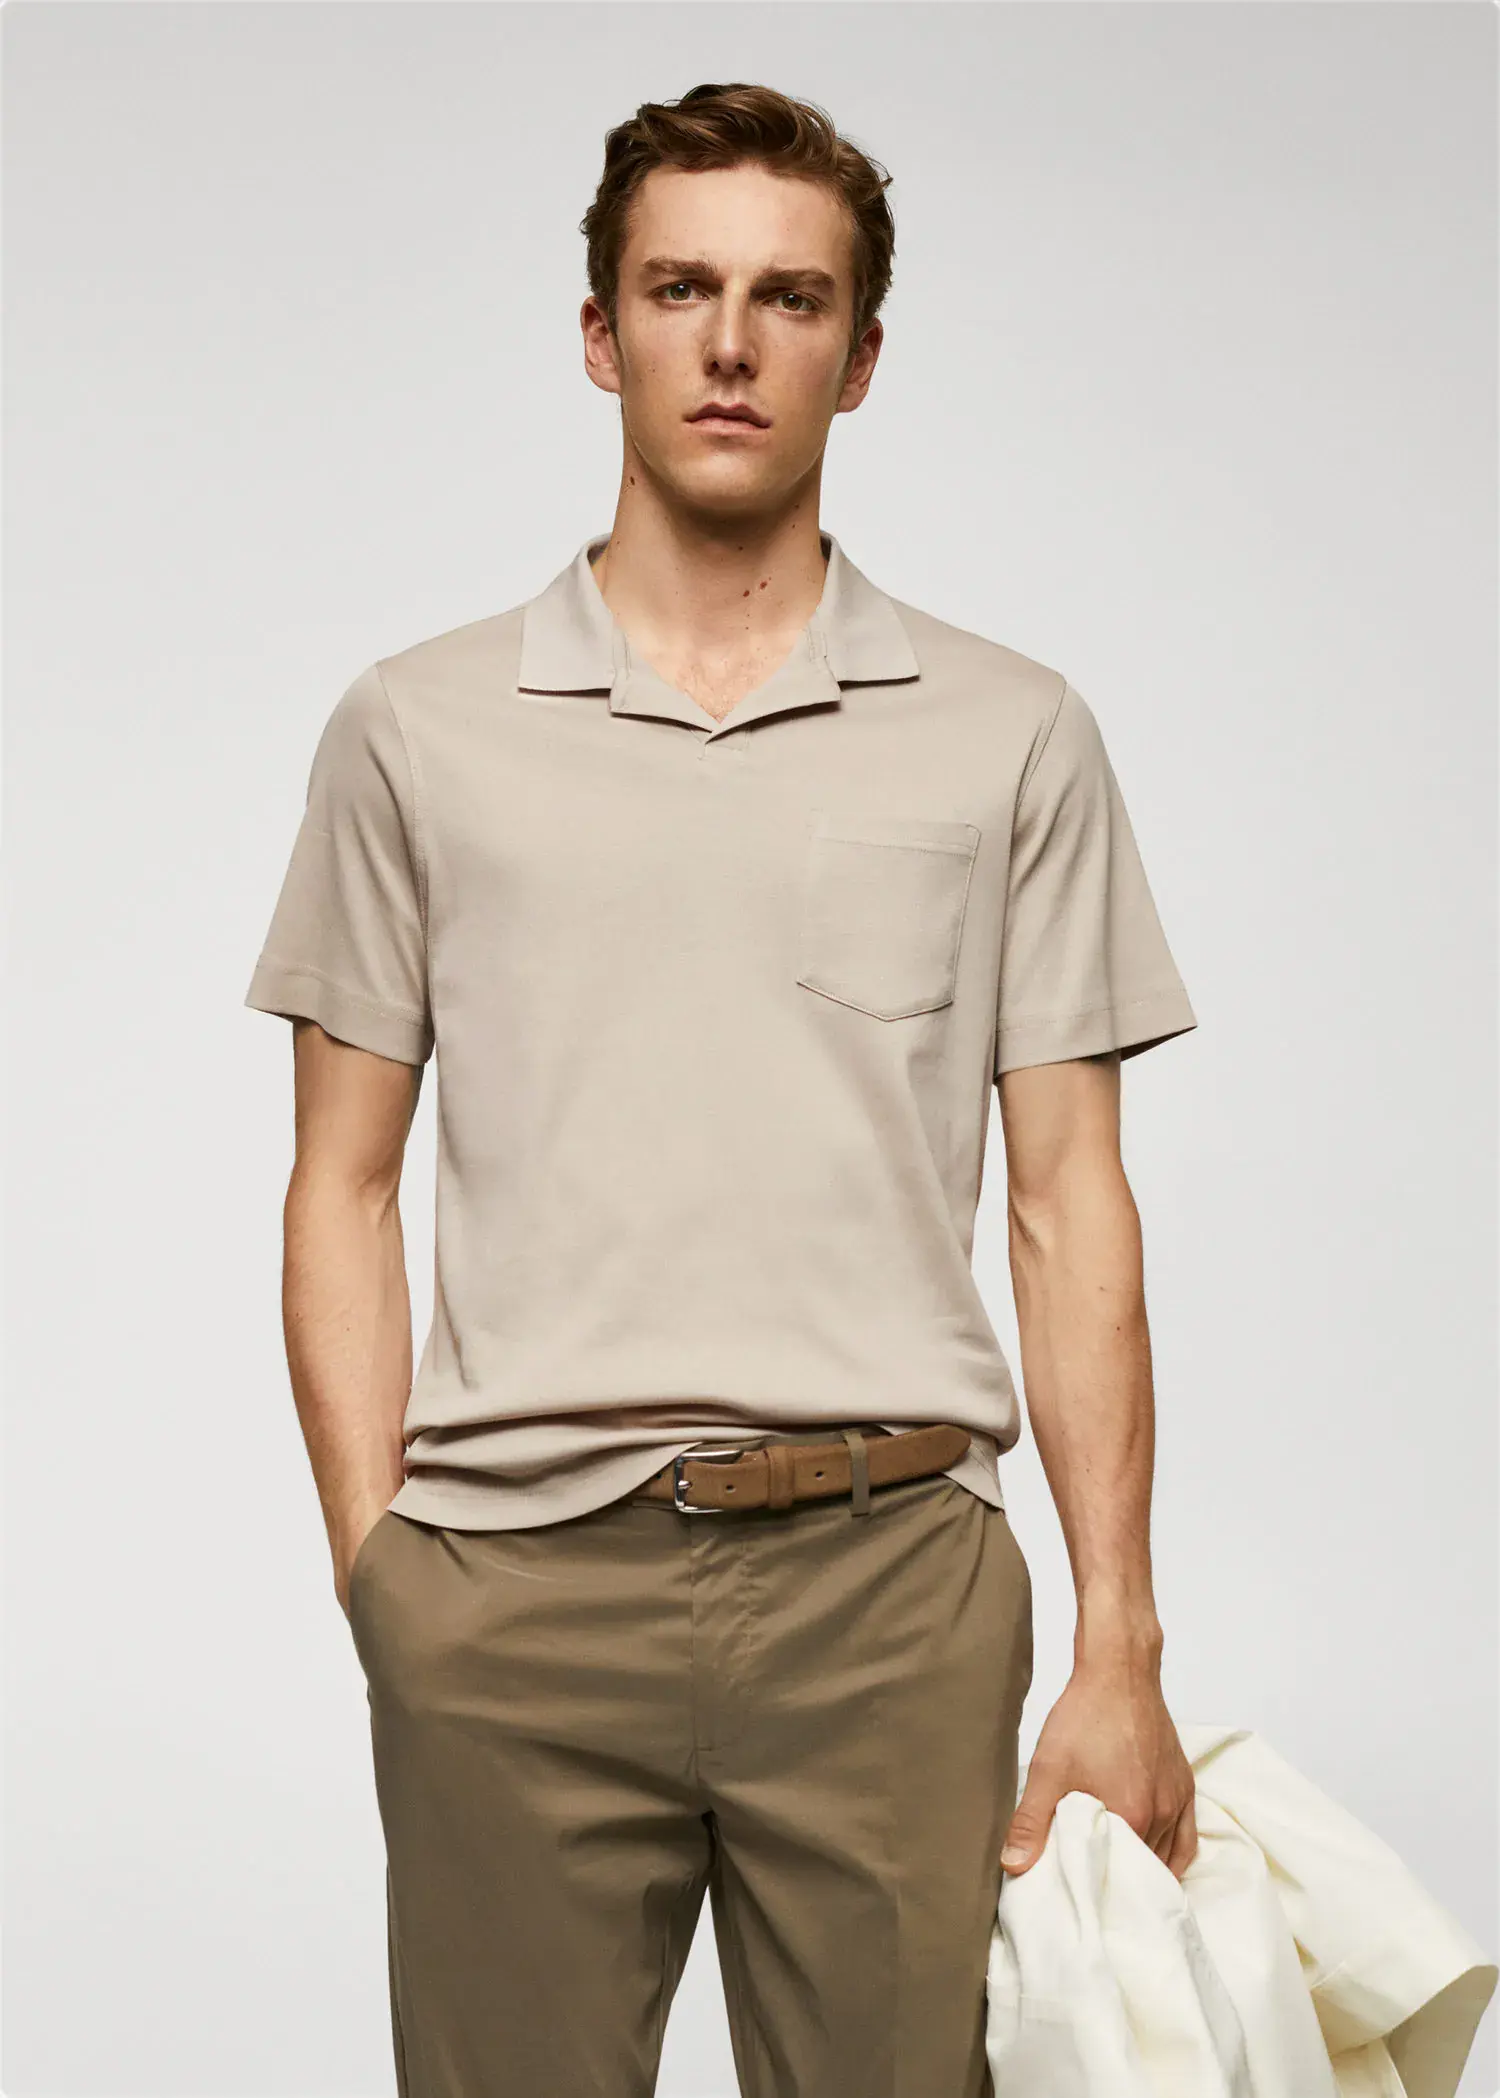 Mango 100% cotton polo shirt with pocket. a man in a tan polo shirt and brown pants. 